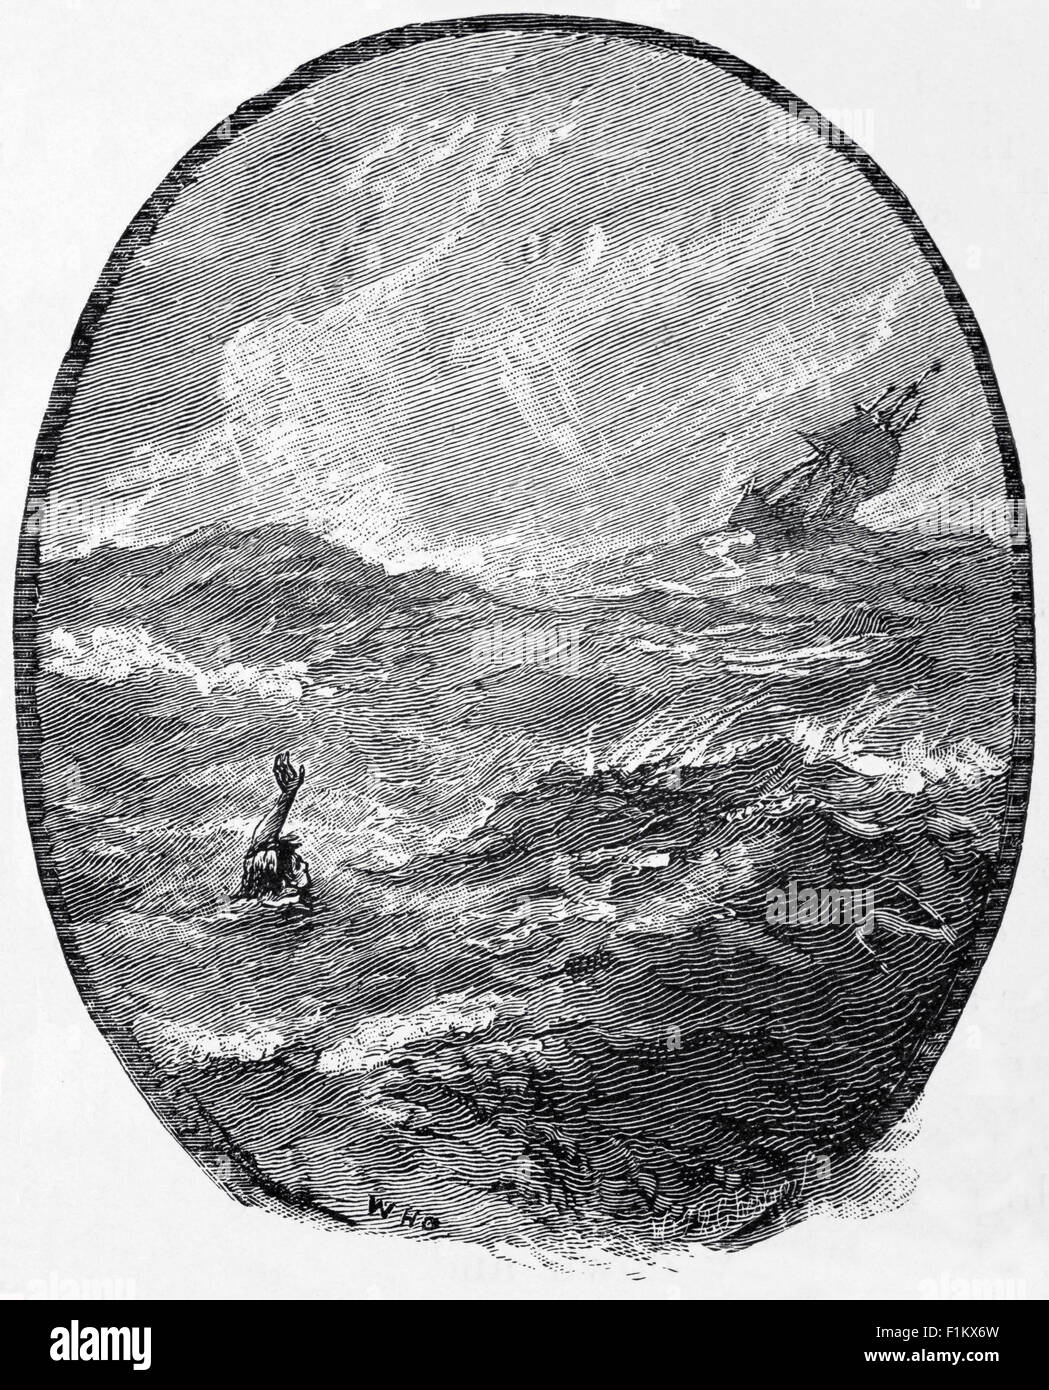 19th century drama at sea with a man overboard from a sailing ship during a storm in the Atlantic Ocean Stock Photo